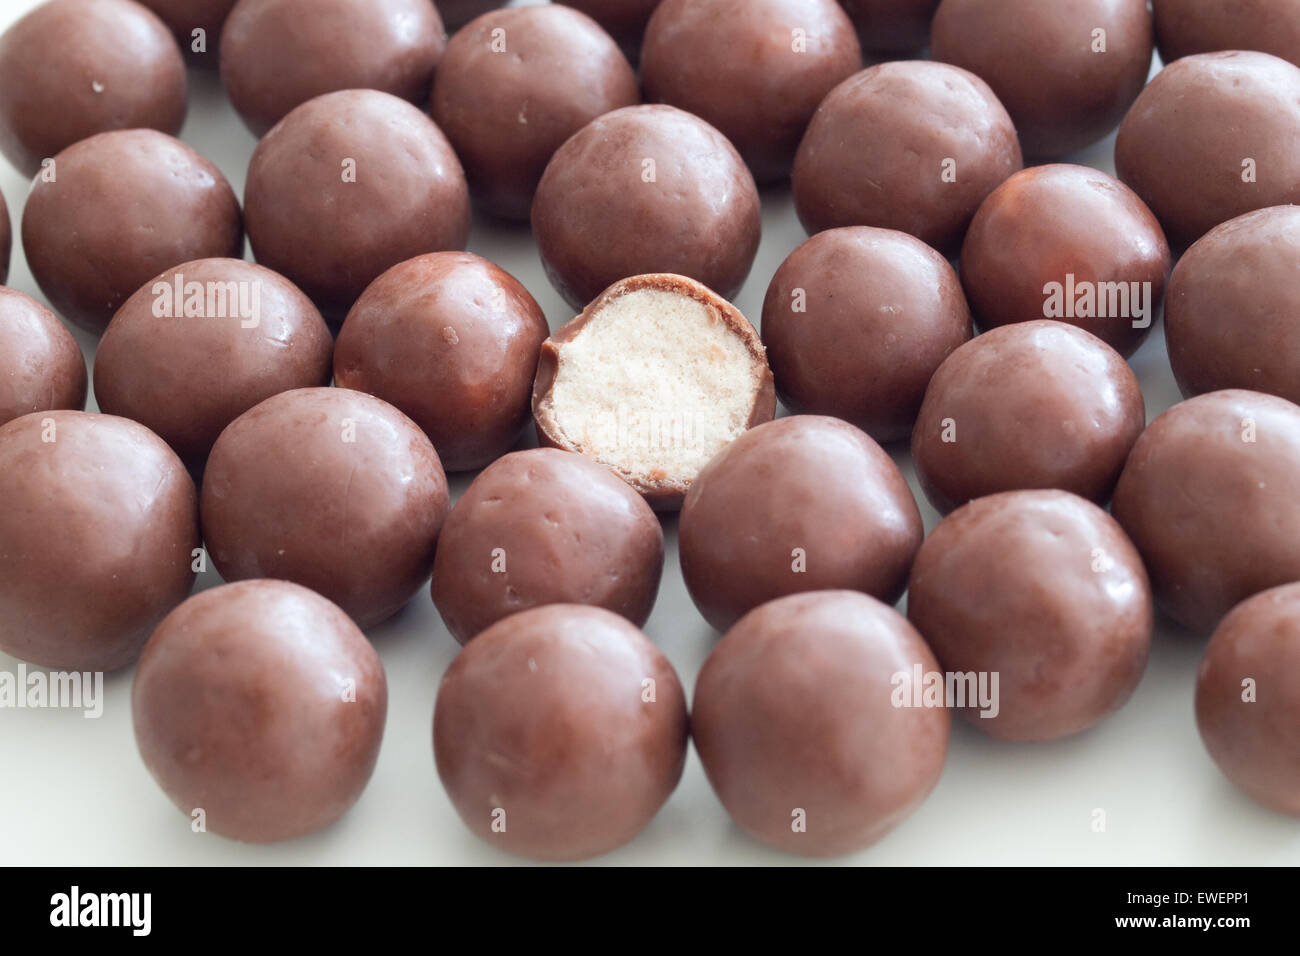 A close-up of Whoppers candy. Whoppers are malted milk balls